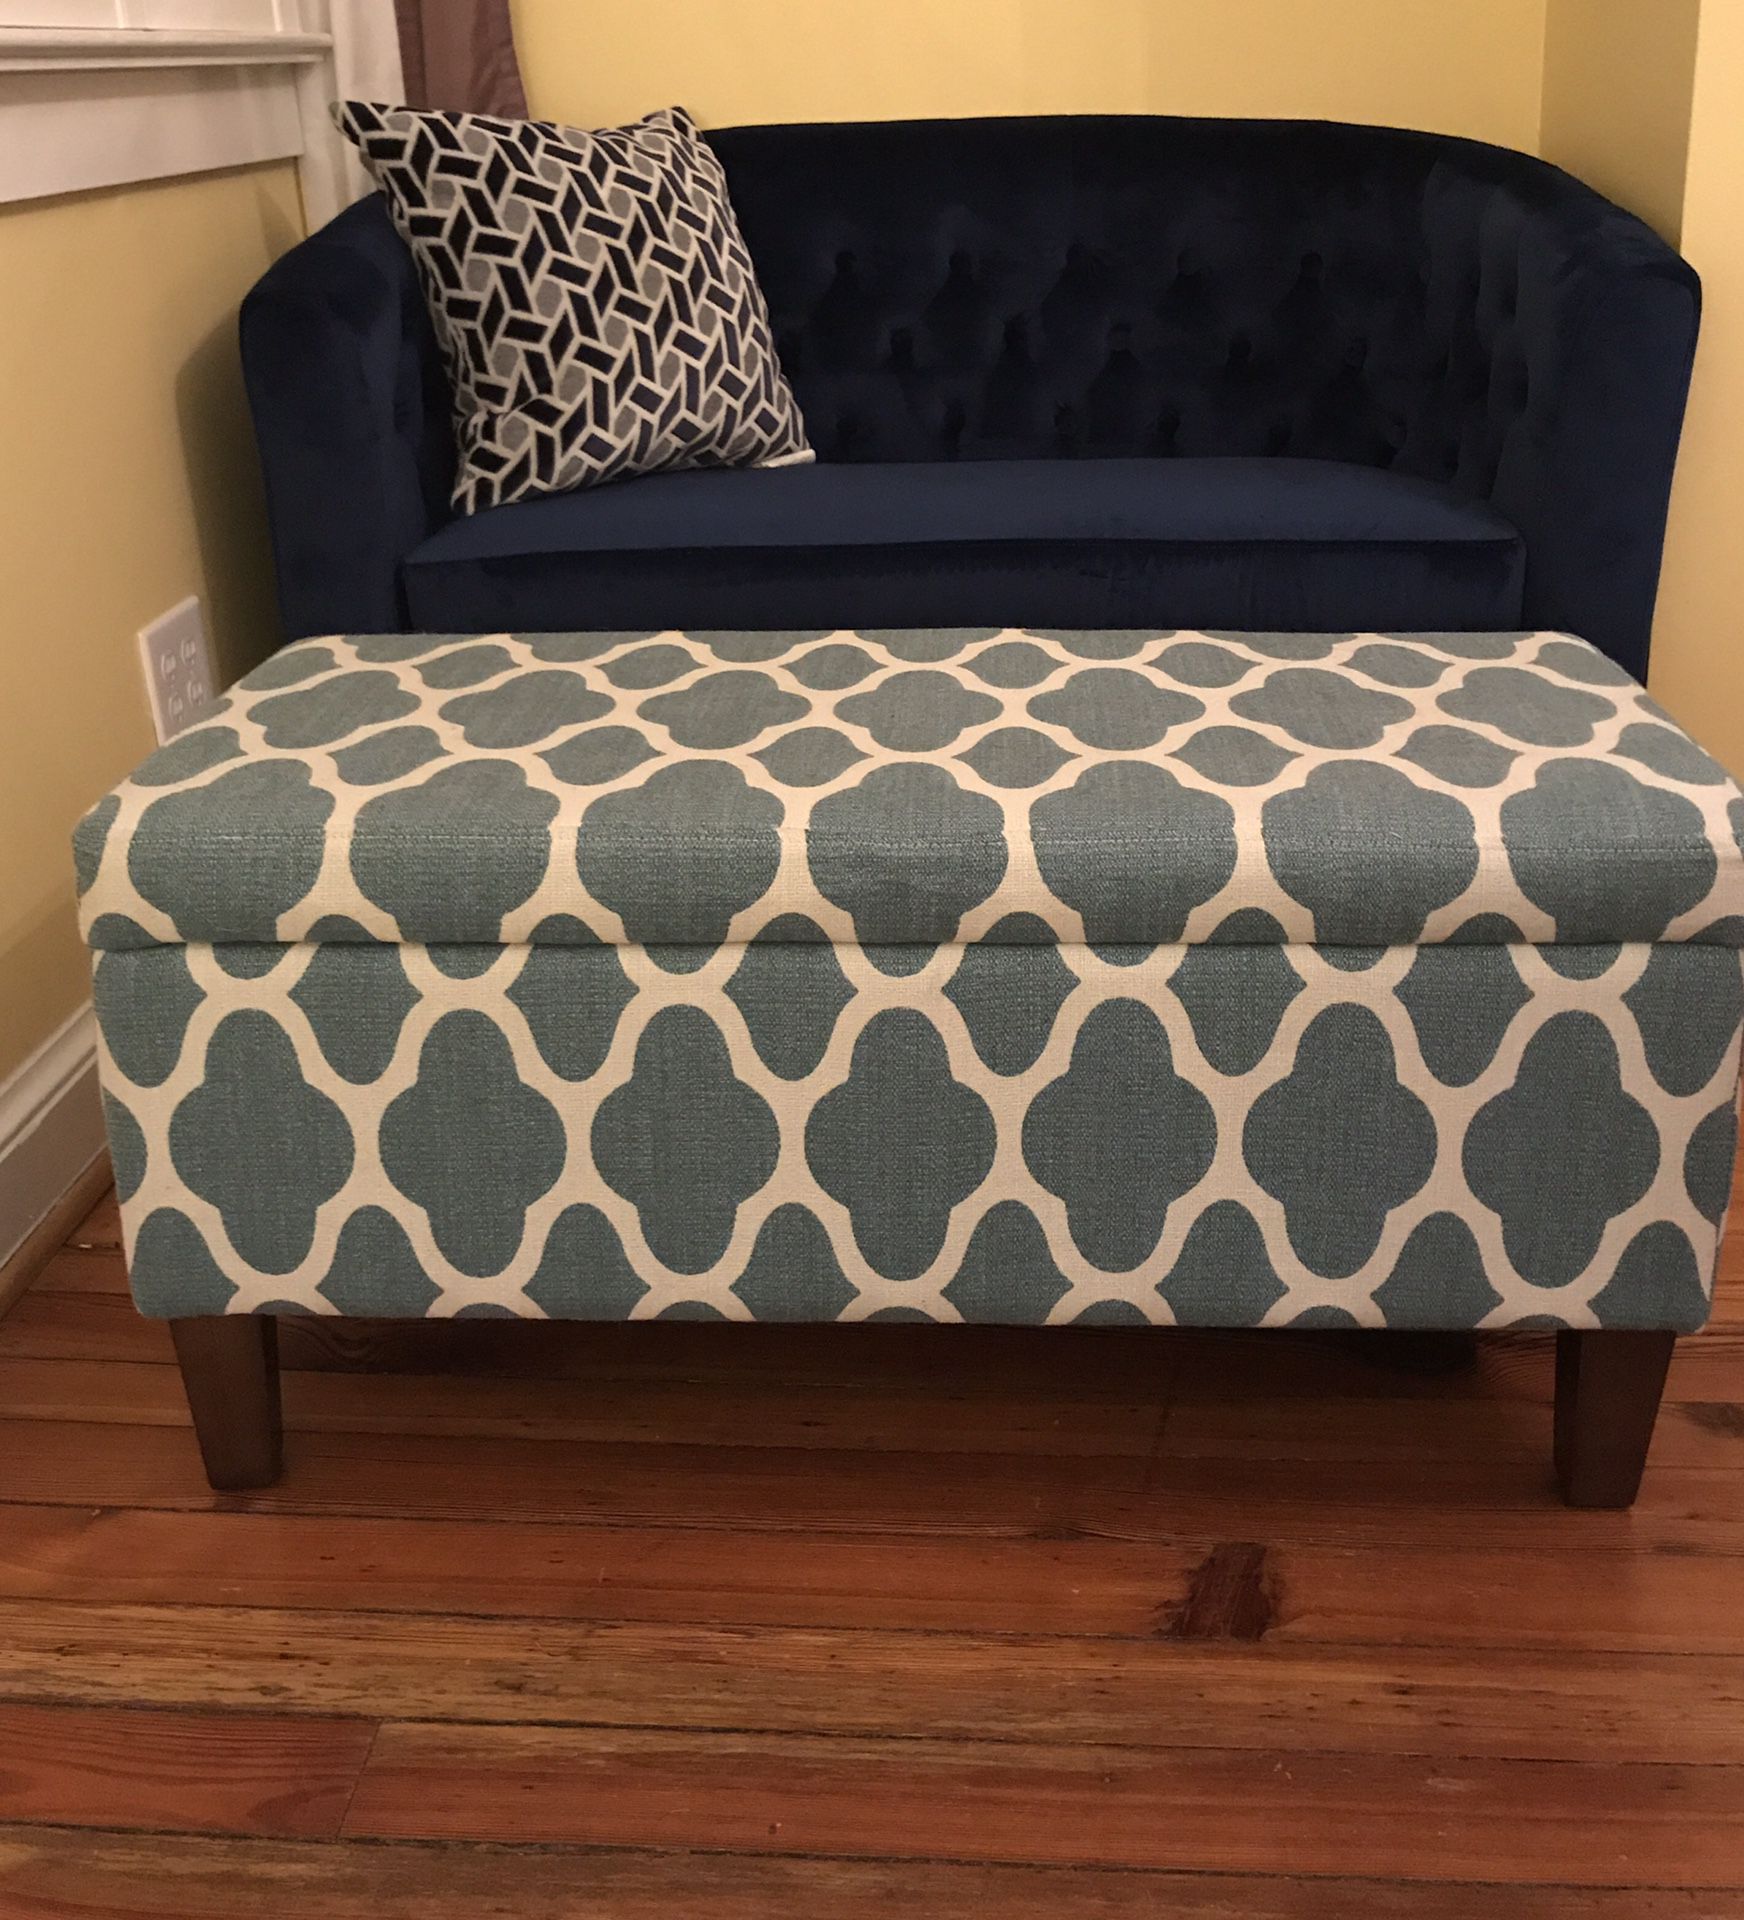 Teal and White Storage Ottoman: 18.0 inches (H) x 36.0 inches (W) x 16.0 inches (D)